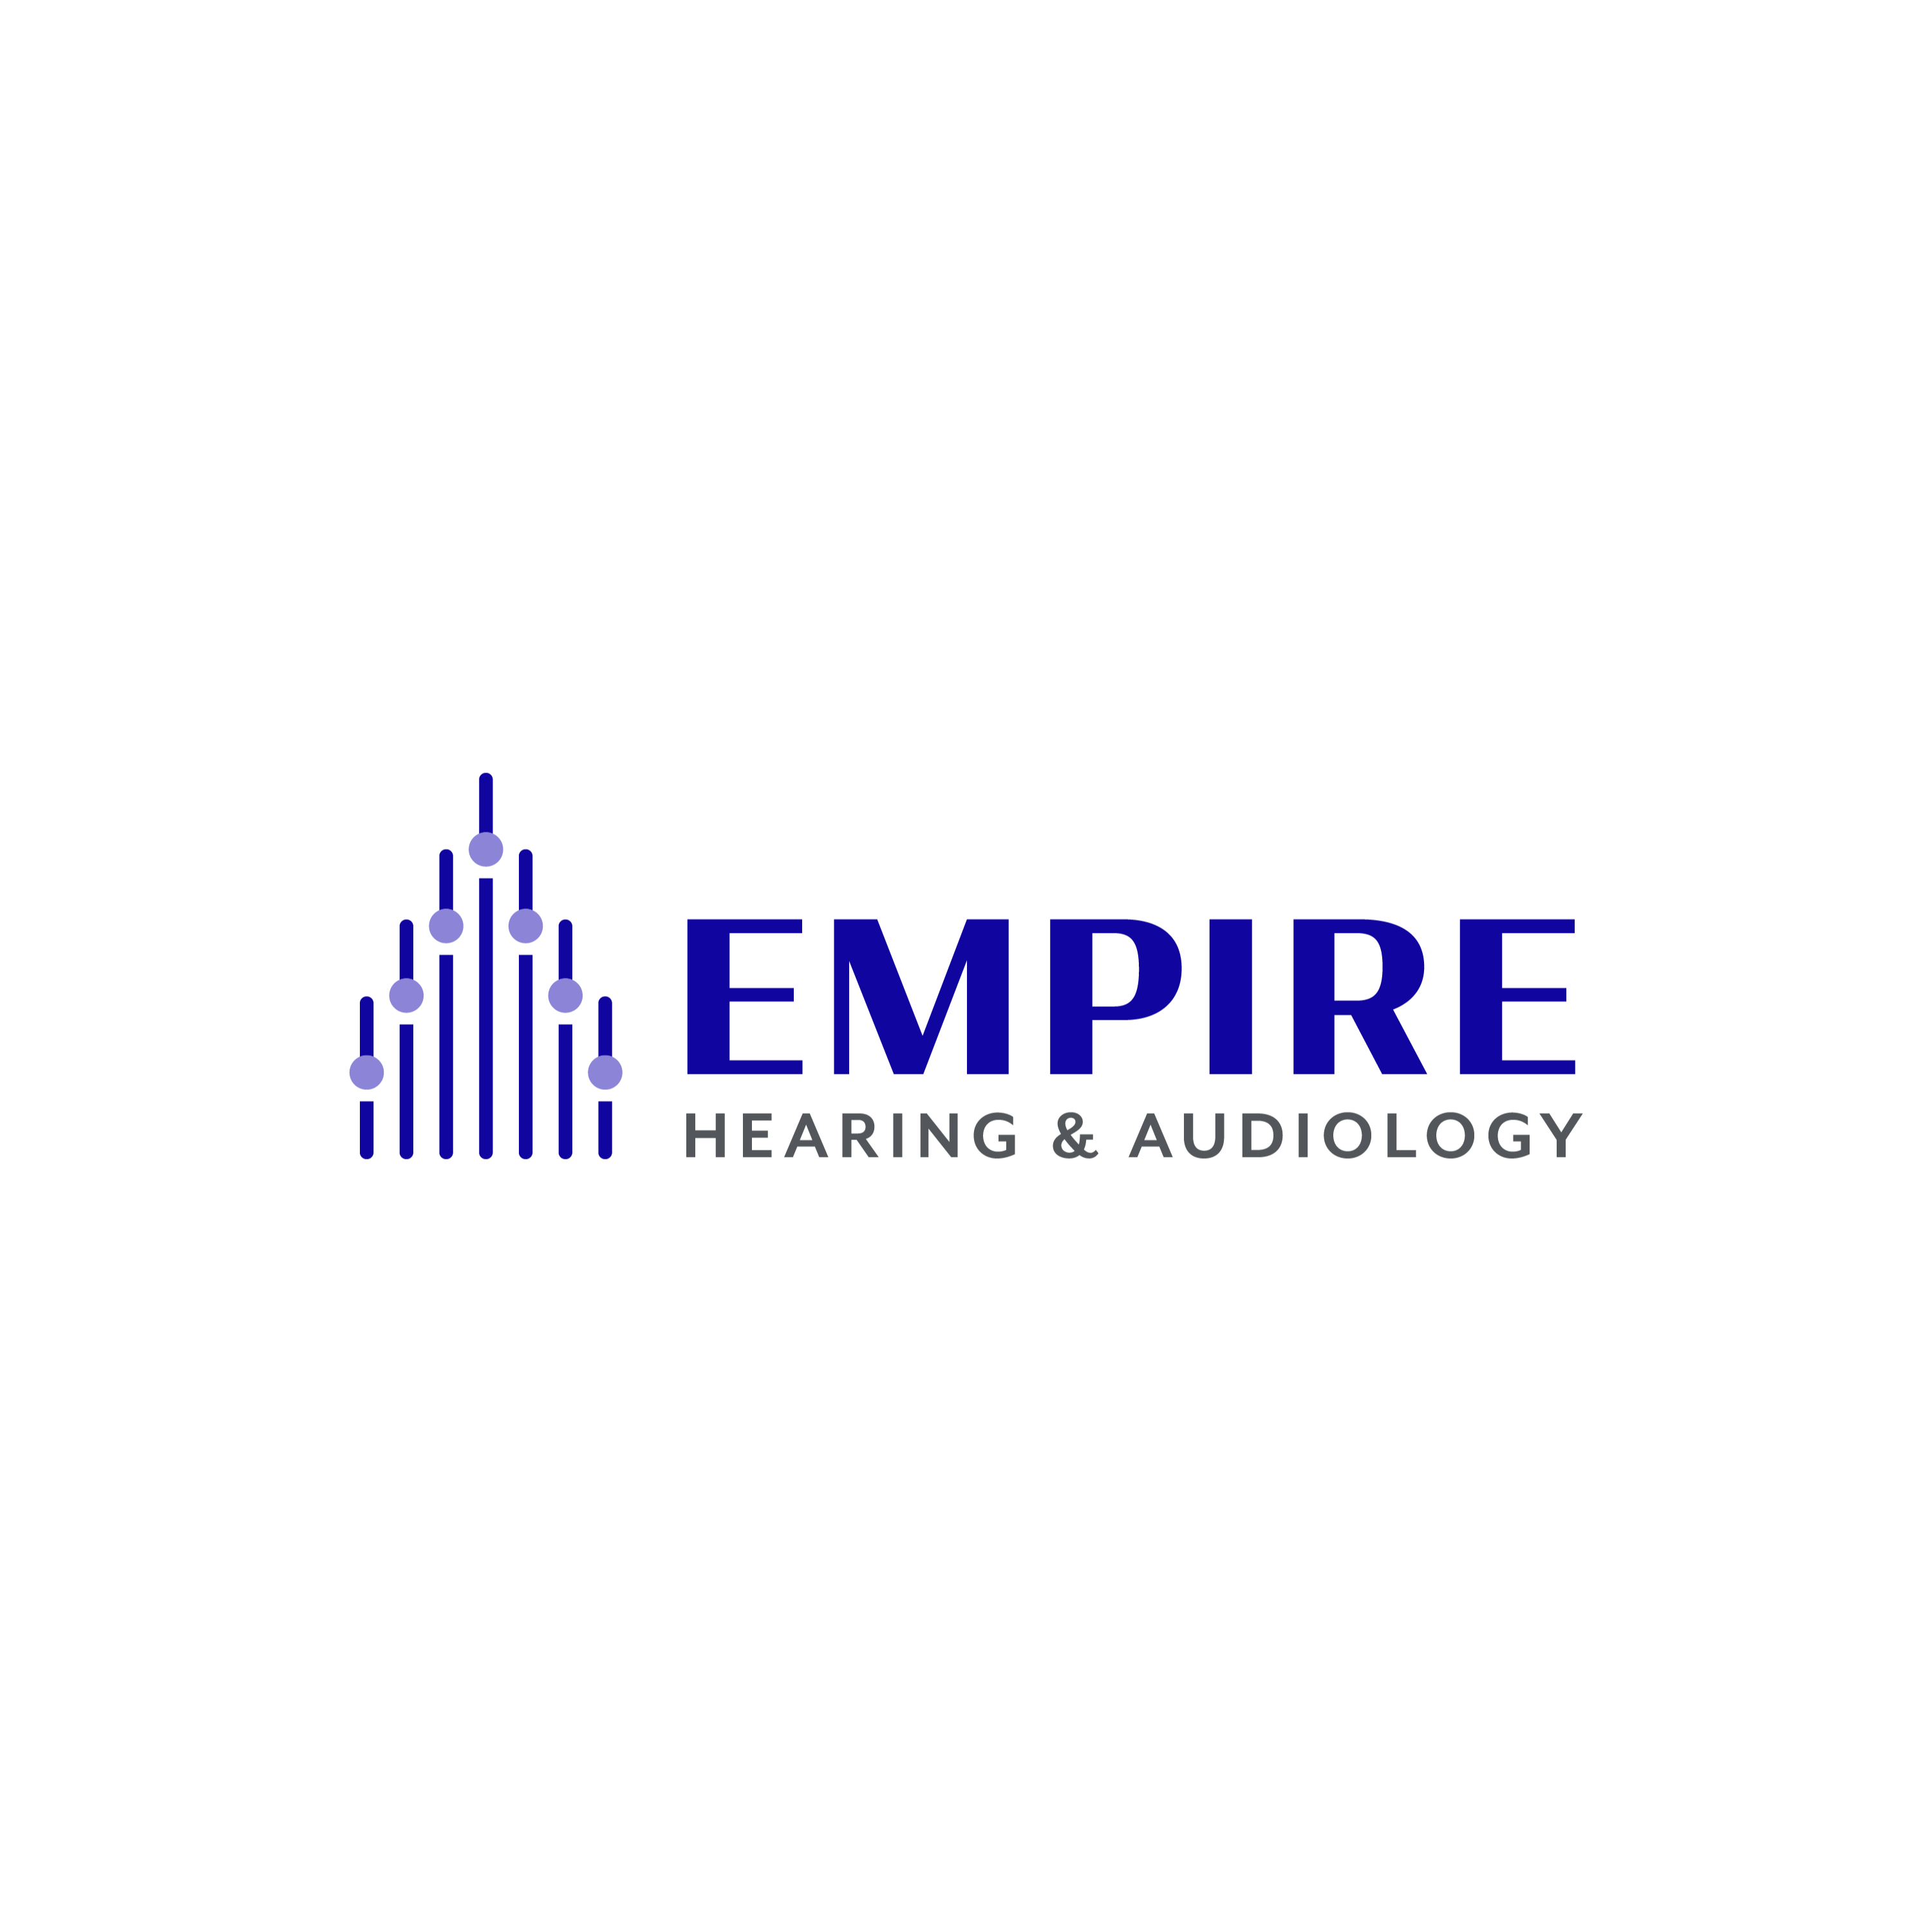 Empire Hearing & Audiology - Liverpool - Liverpool, NY 13090 - (315)451-7221 | ShowMeLocal.com